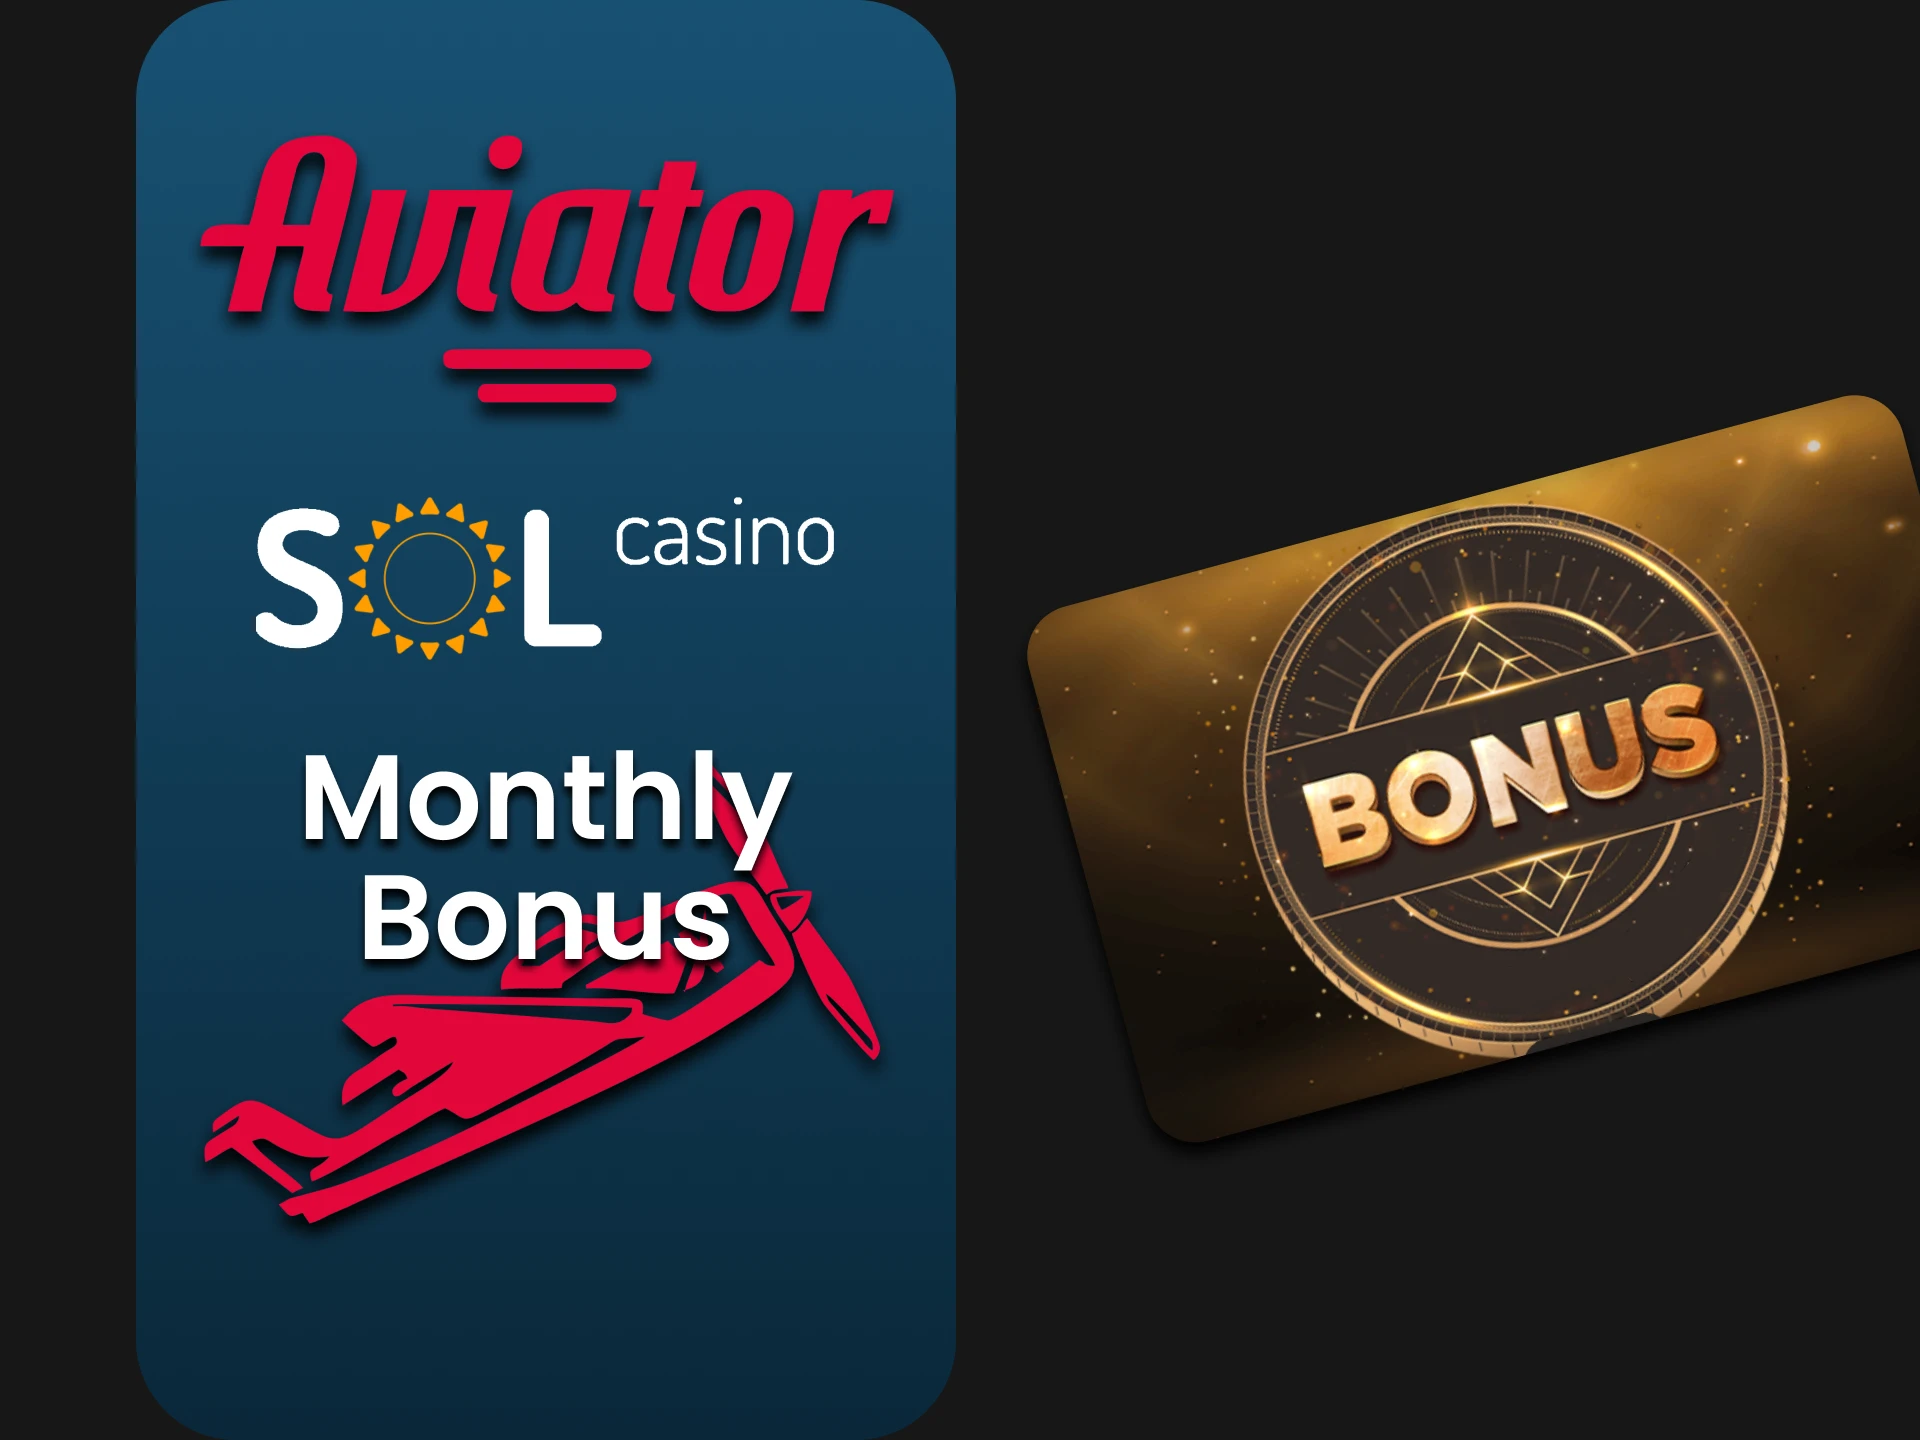 Sol Casino gives a monthly bonus for the Aviator.